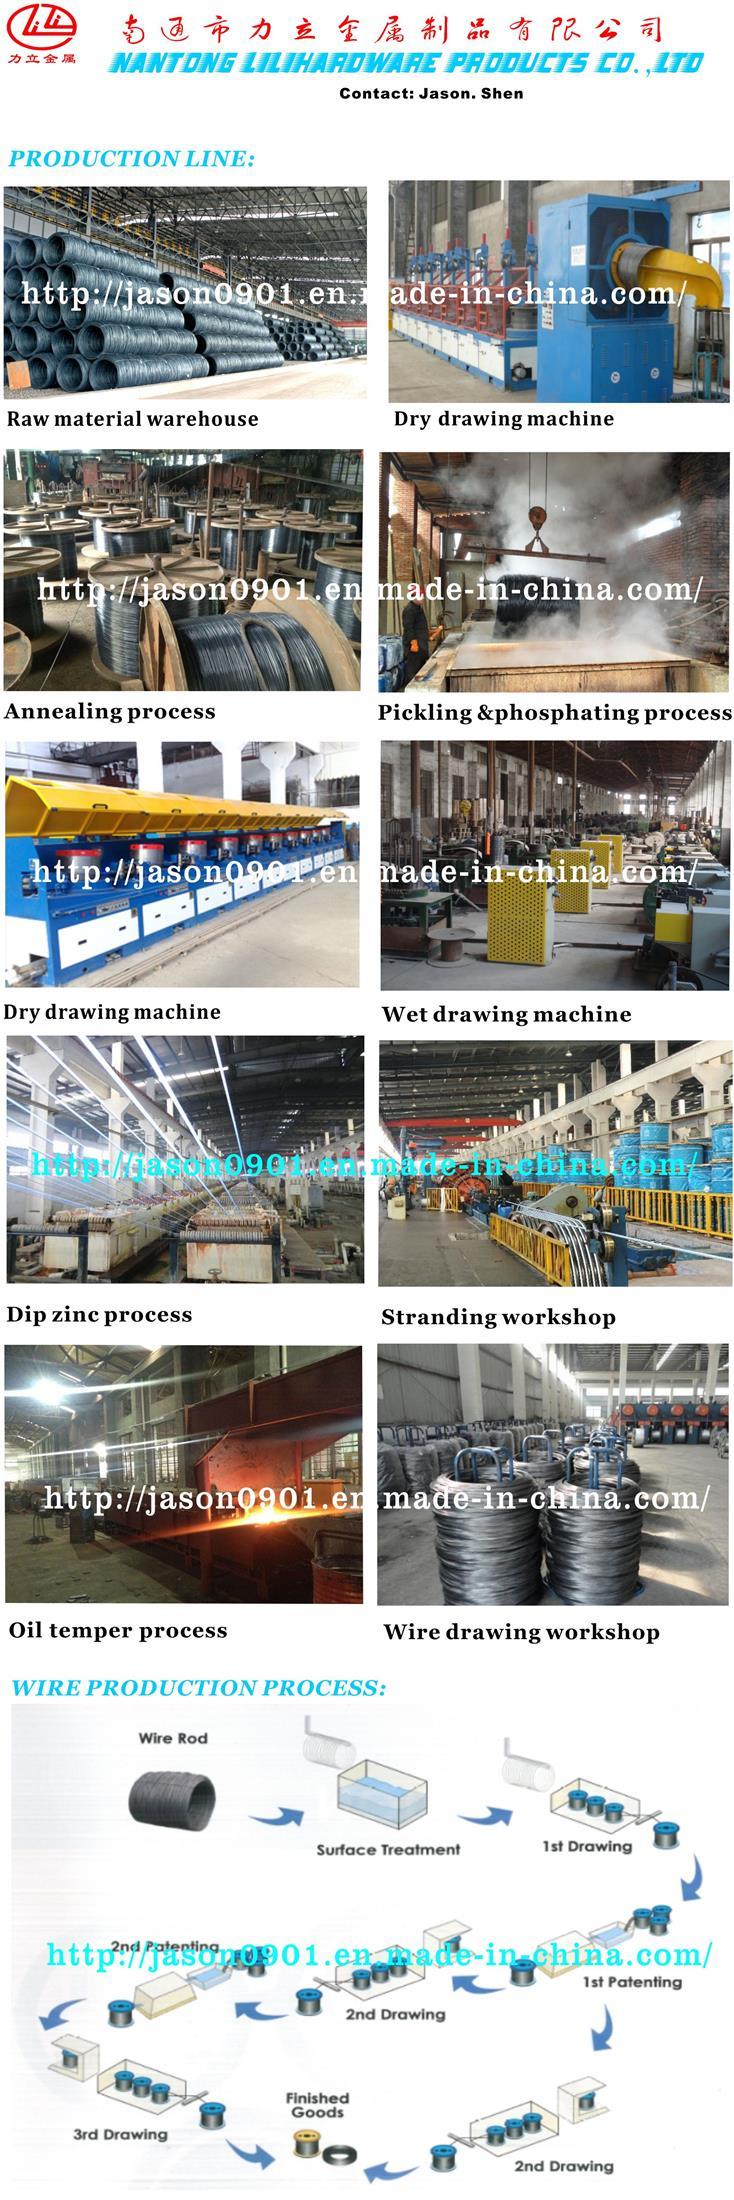 Steel Wire Ropes for Cranes, Wire Rope, Steel Wire Rope, Steel Wire, Stainless Steel Wire